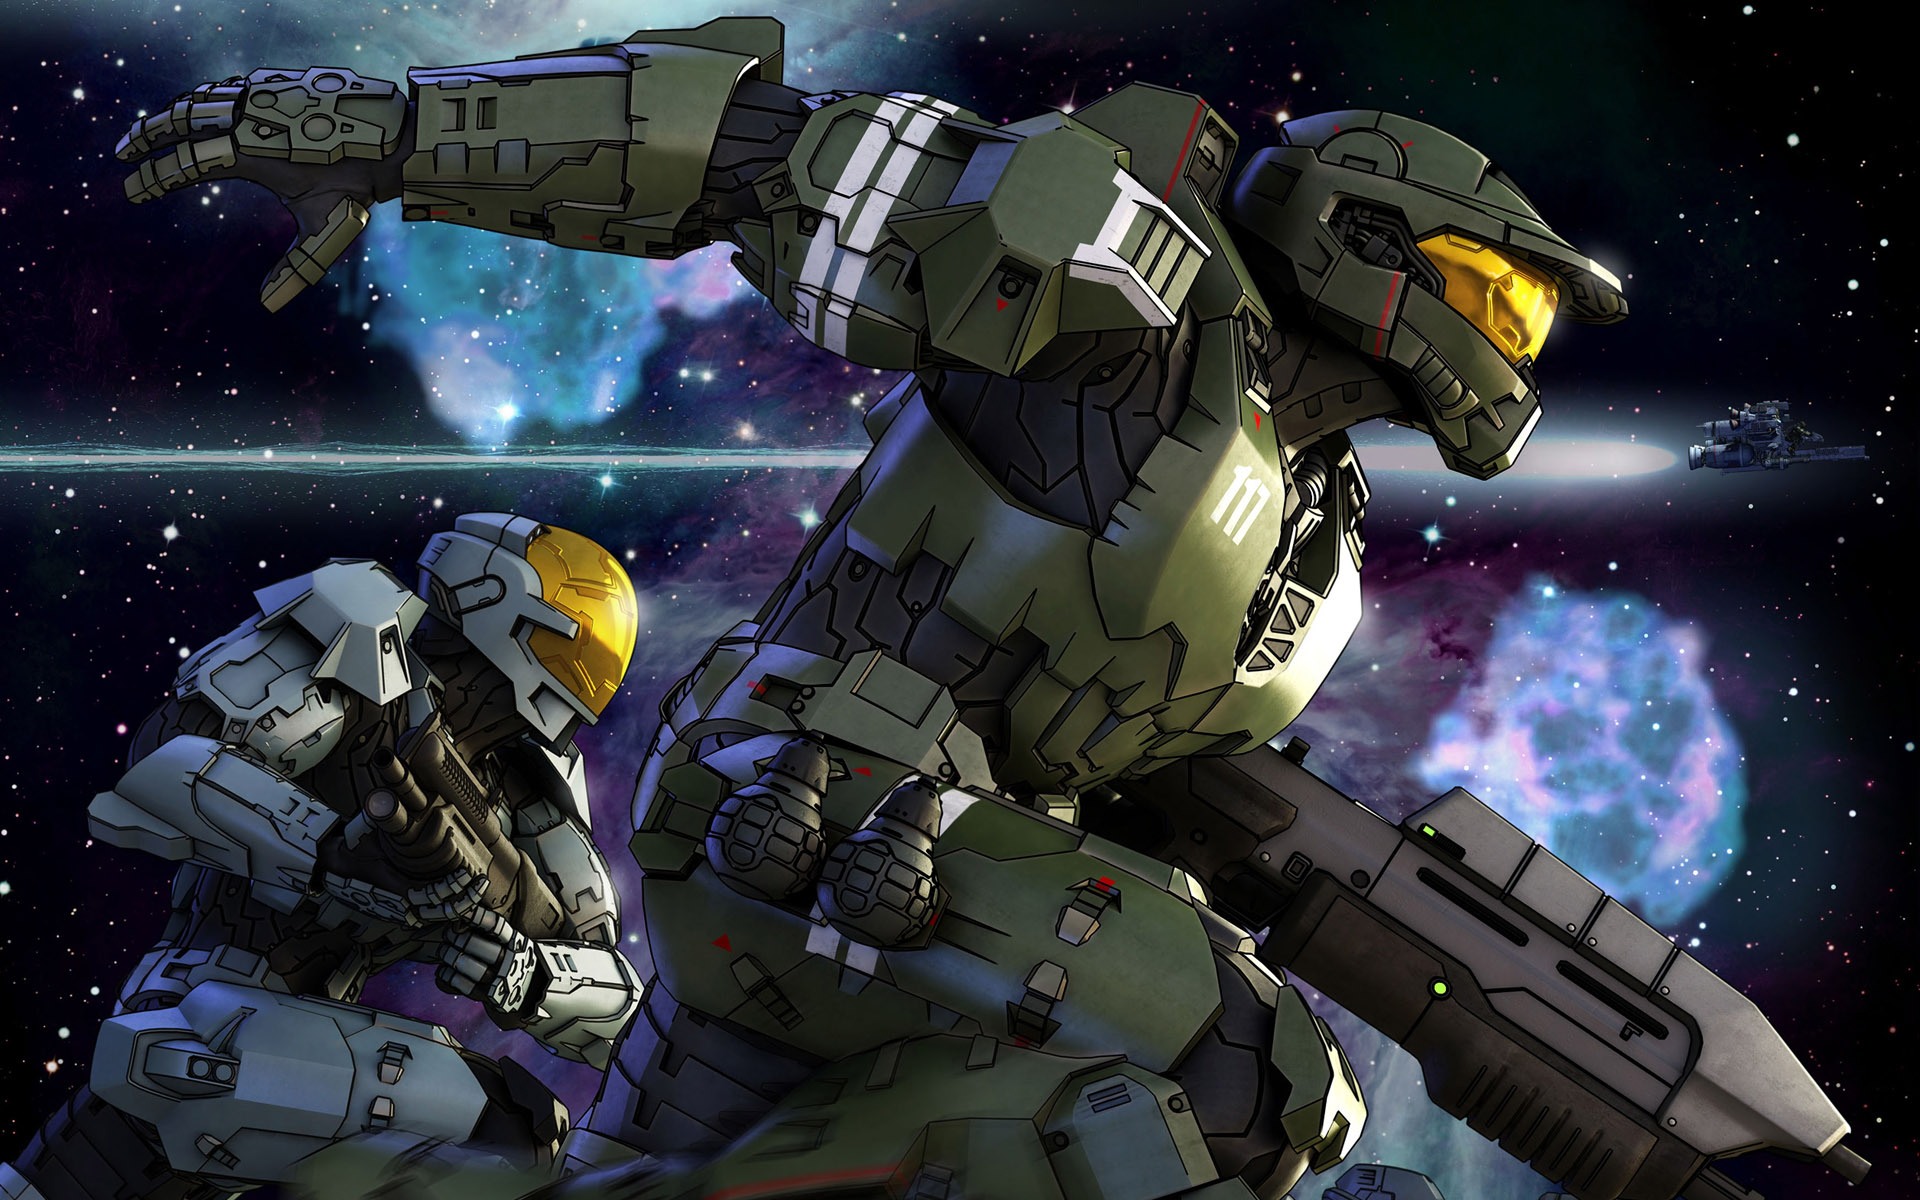 Form Below To Delete This Halo Spartans Wallpaper Image From Our Index